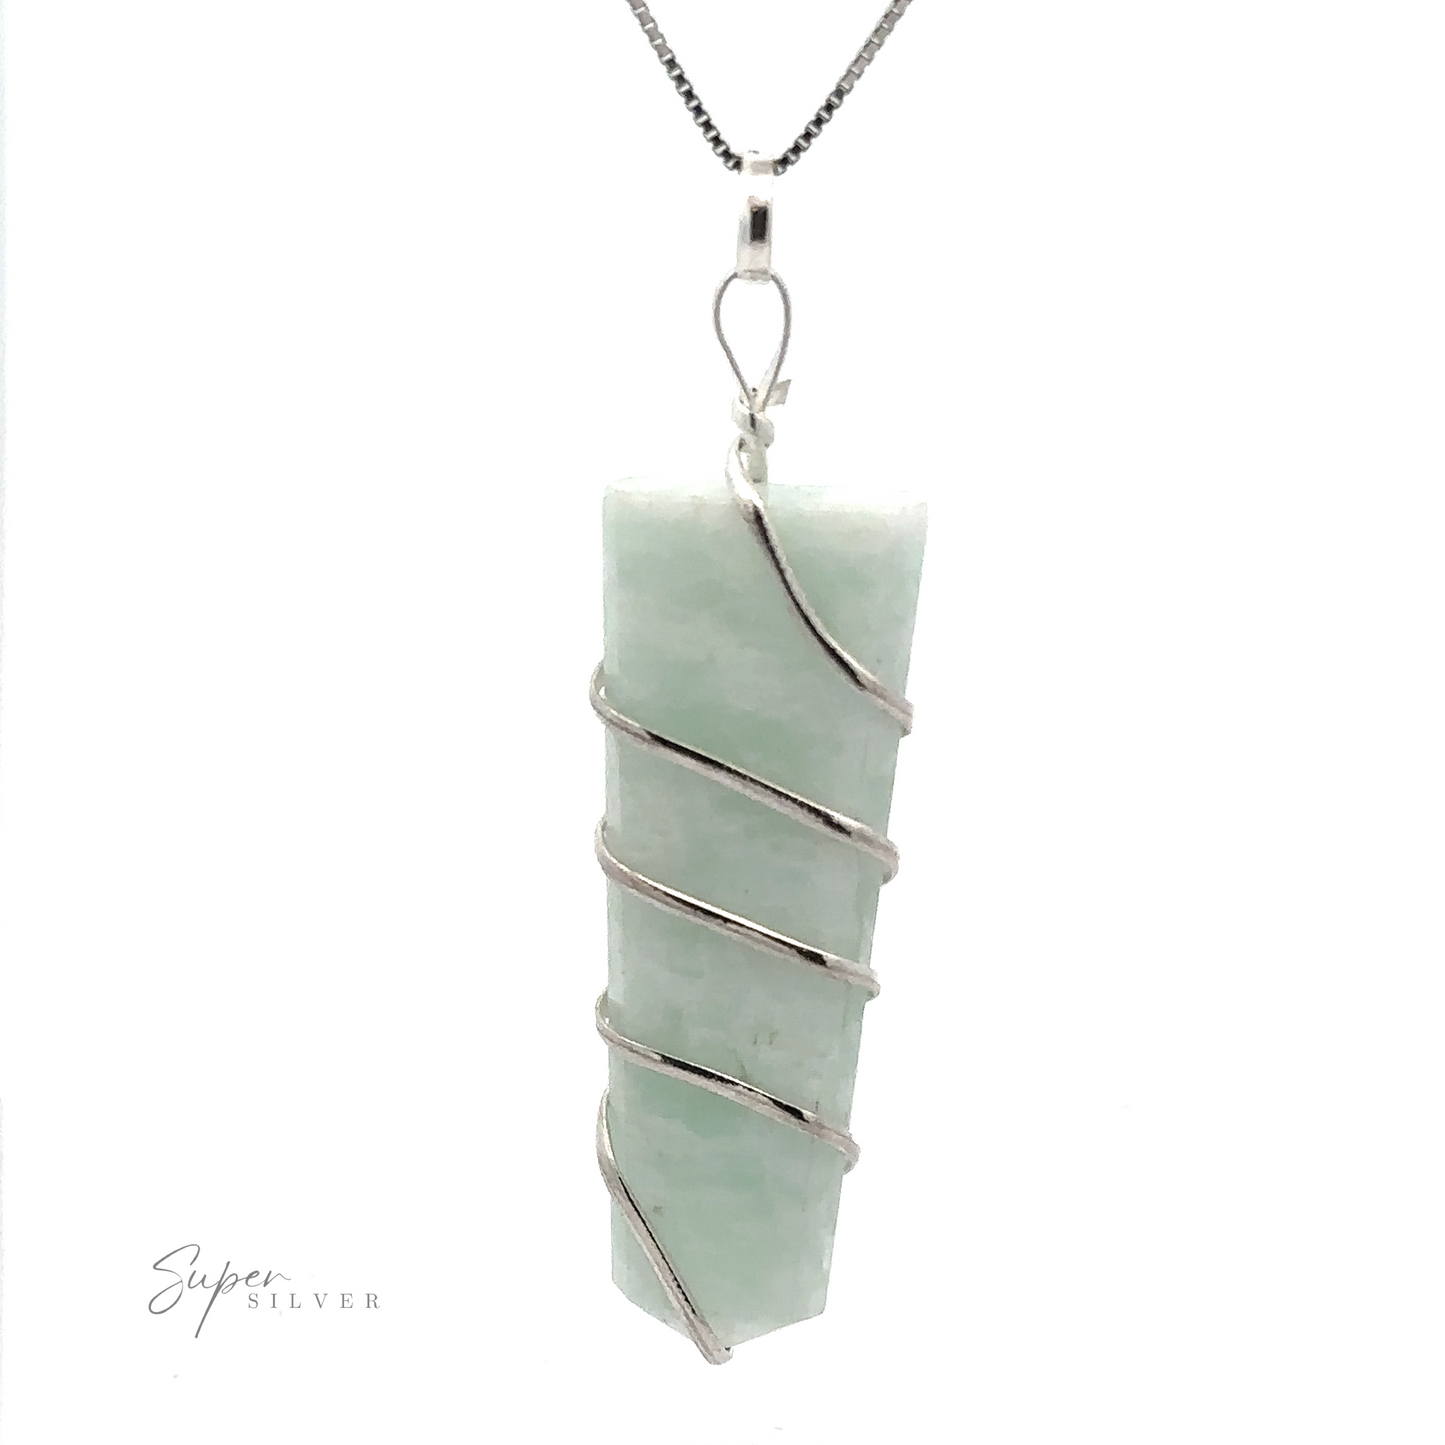 
                  
                    A Wire Wrapped Slab Pendant with a rectangular, light green stone slab, meticulously wrapped in silver wire, hangs from a thin silver chain. The background is white, and the text "Super Silver" is printed at the bottom left. This exquisite piece of gemstone jewelry makes a subtle yet standout statement.
                  
                